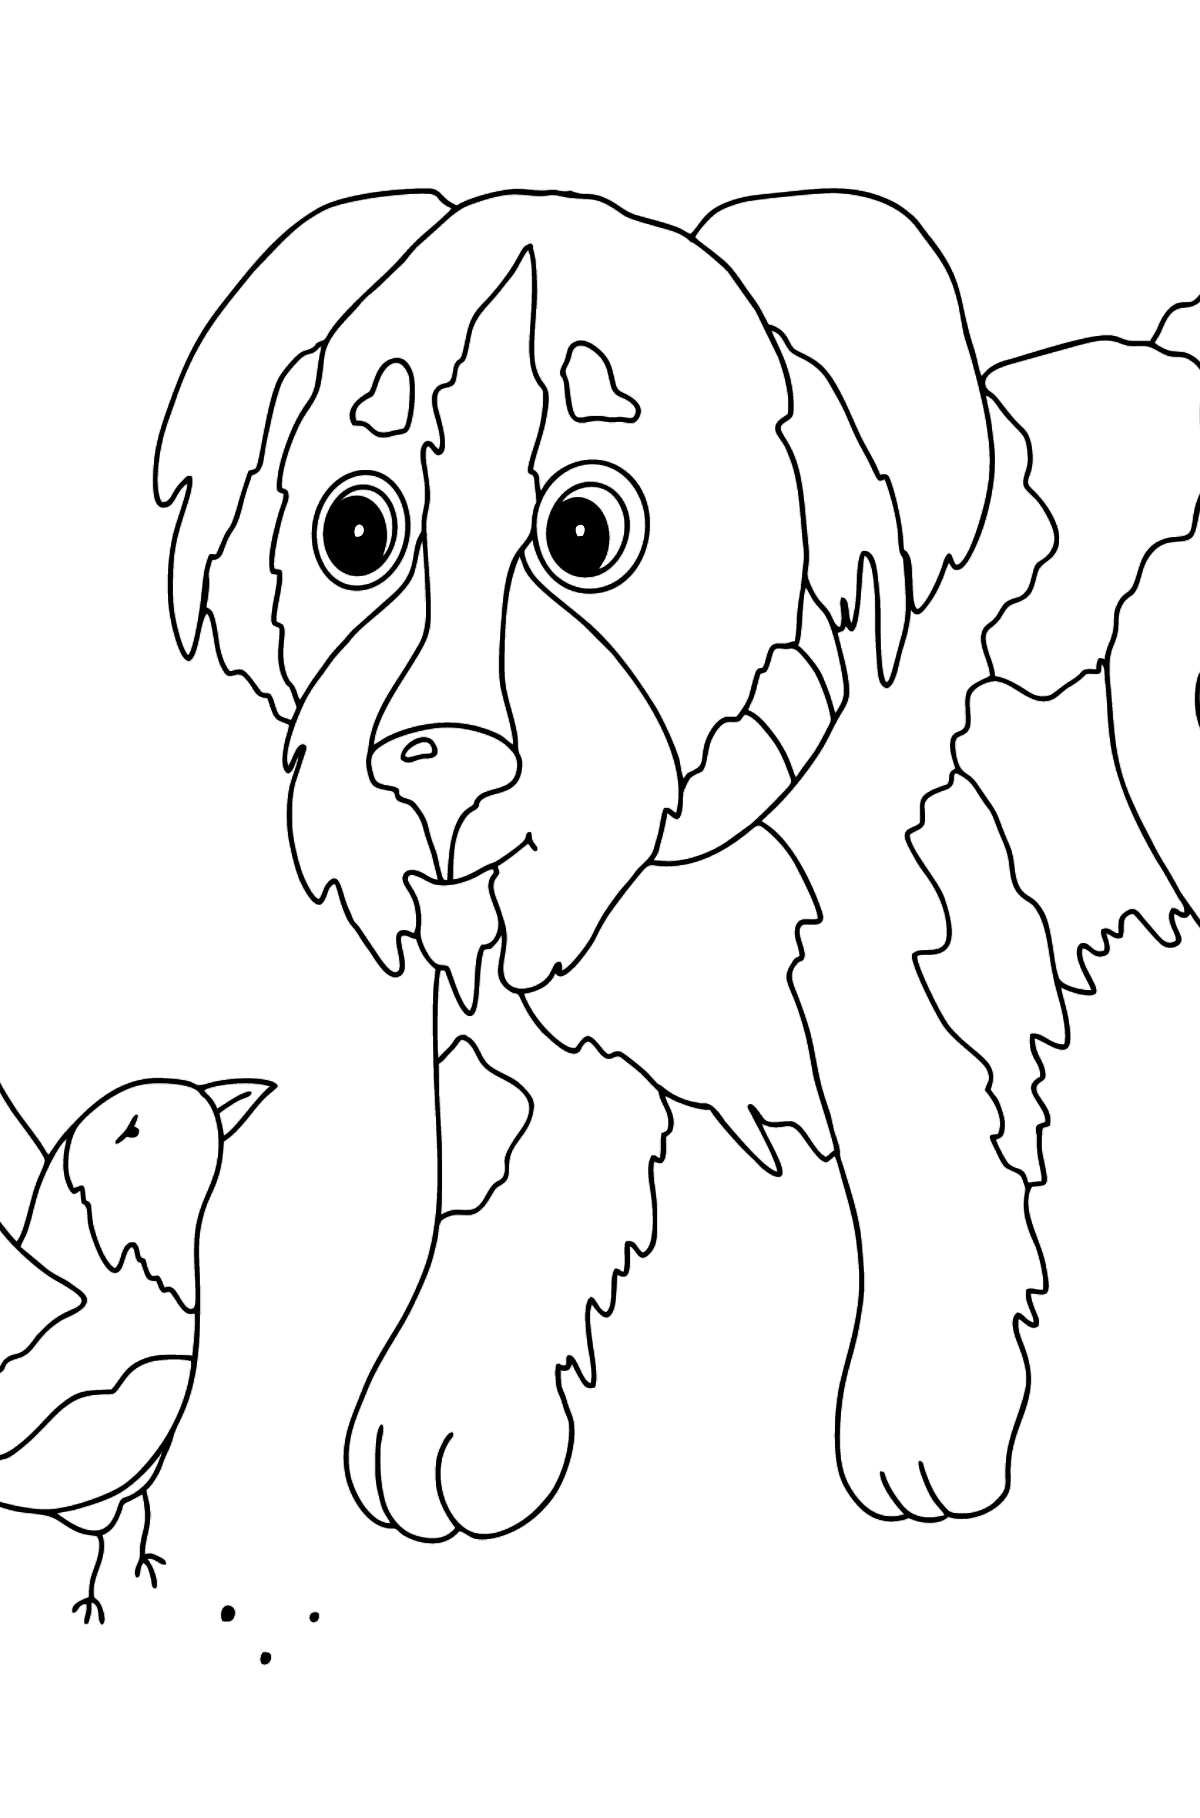 Coloring Page - A Dog is Talking to a Bird - Coloring Pages for Kids